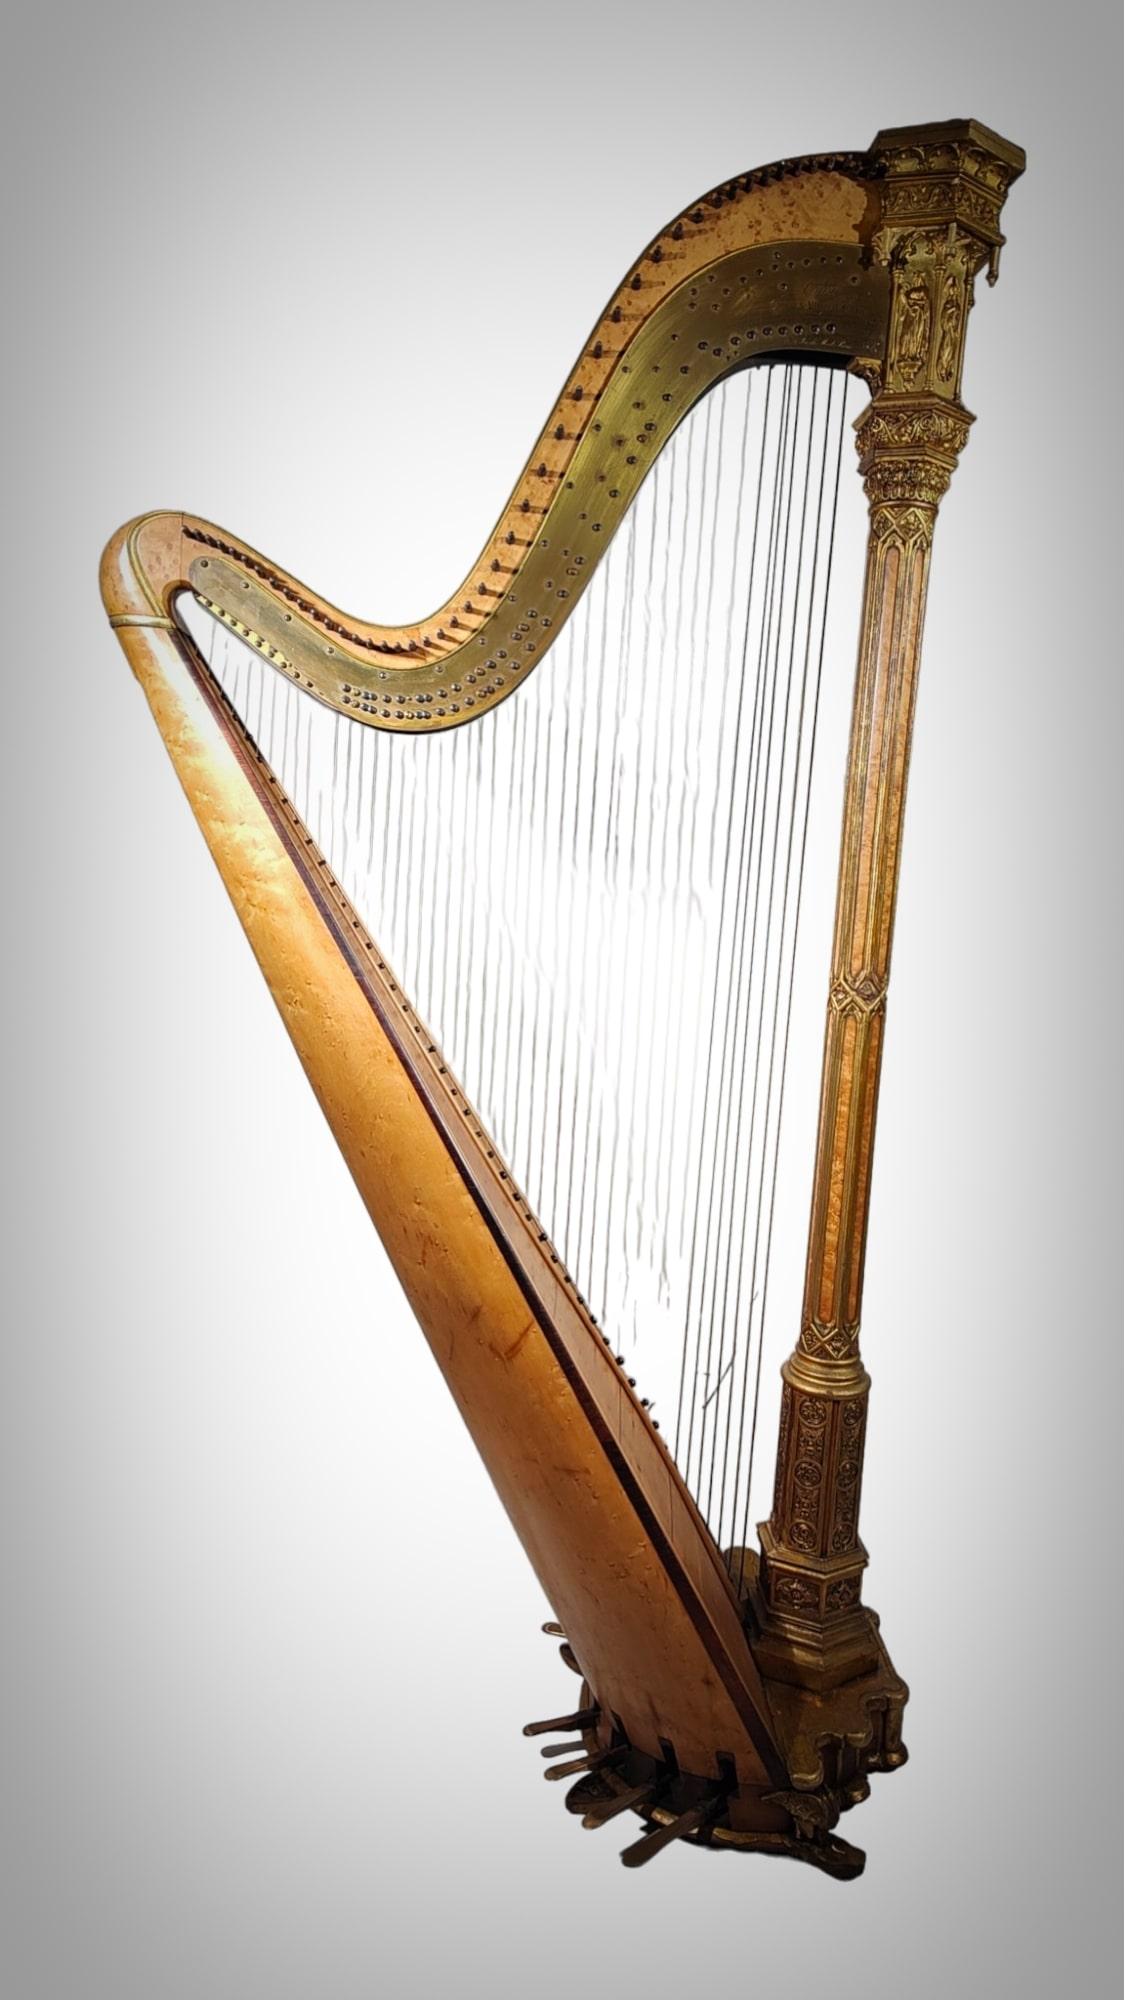 Antique harp by Sebastian Erard, xix th
Dimensions: H x W x D: approx. 176 x 93 x 50 cm

Description:
Beautiful and very elegant harp from the workshop of the famous harp and piano maker Sebastian Erard.

The foot, the column and the head of the